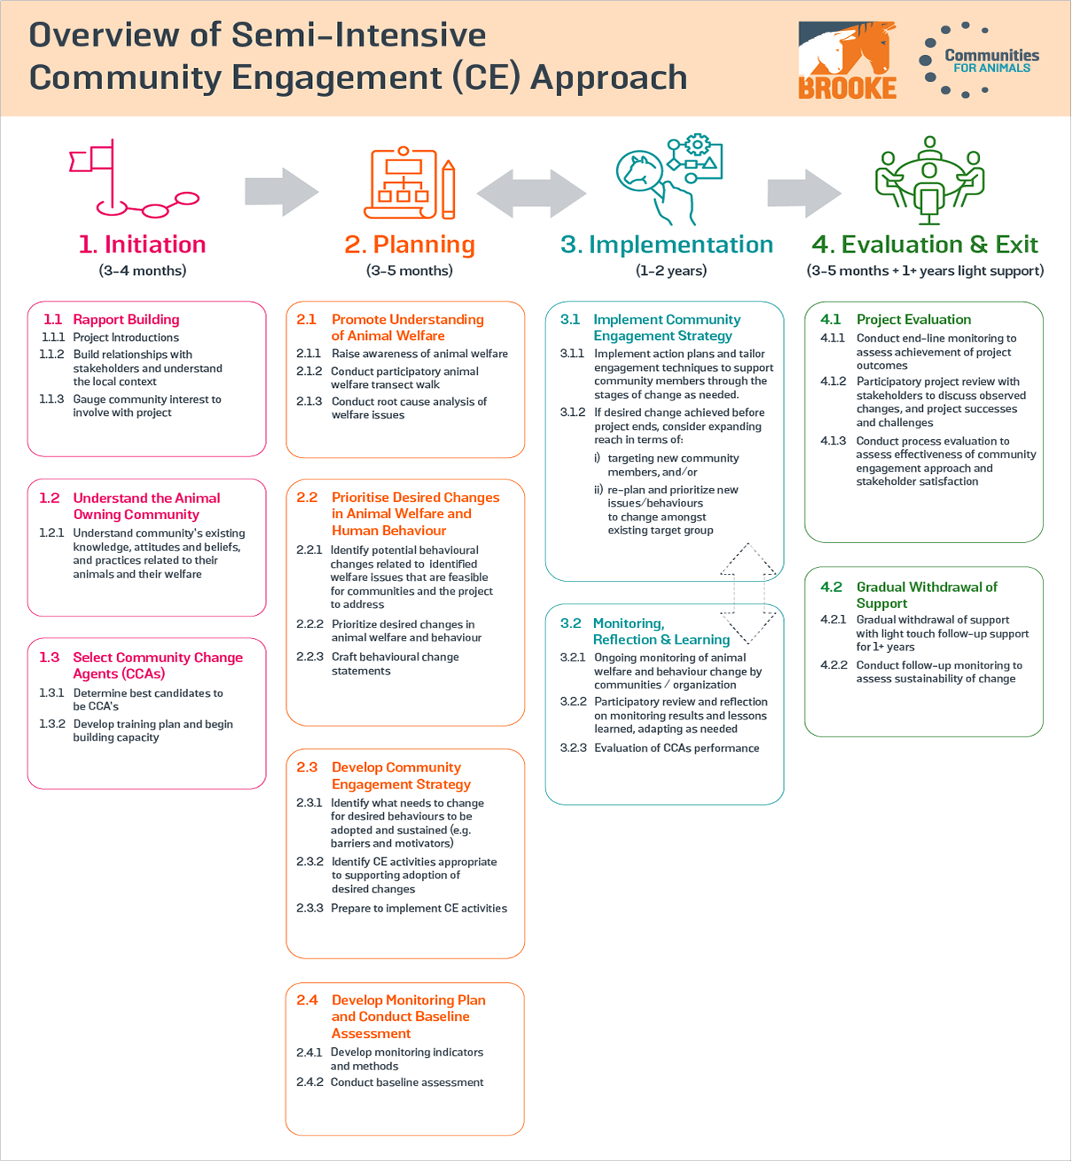 Figure 45: Overview of Semi-Intensive Community Engagement (CE) Approach